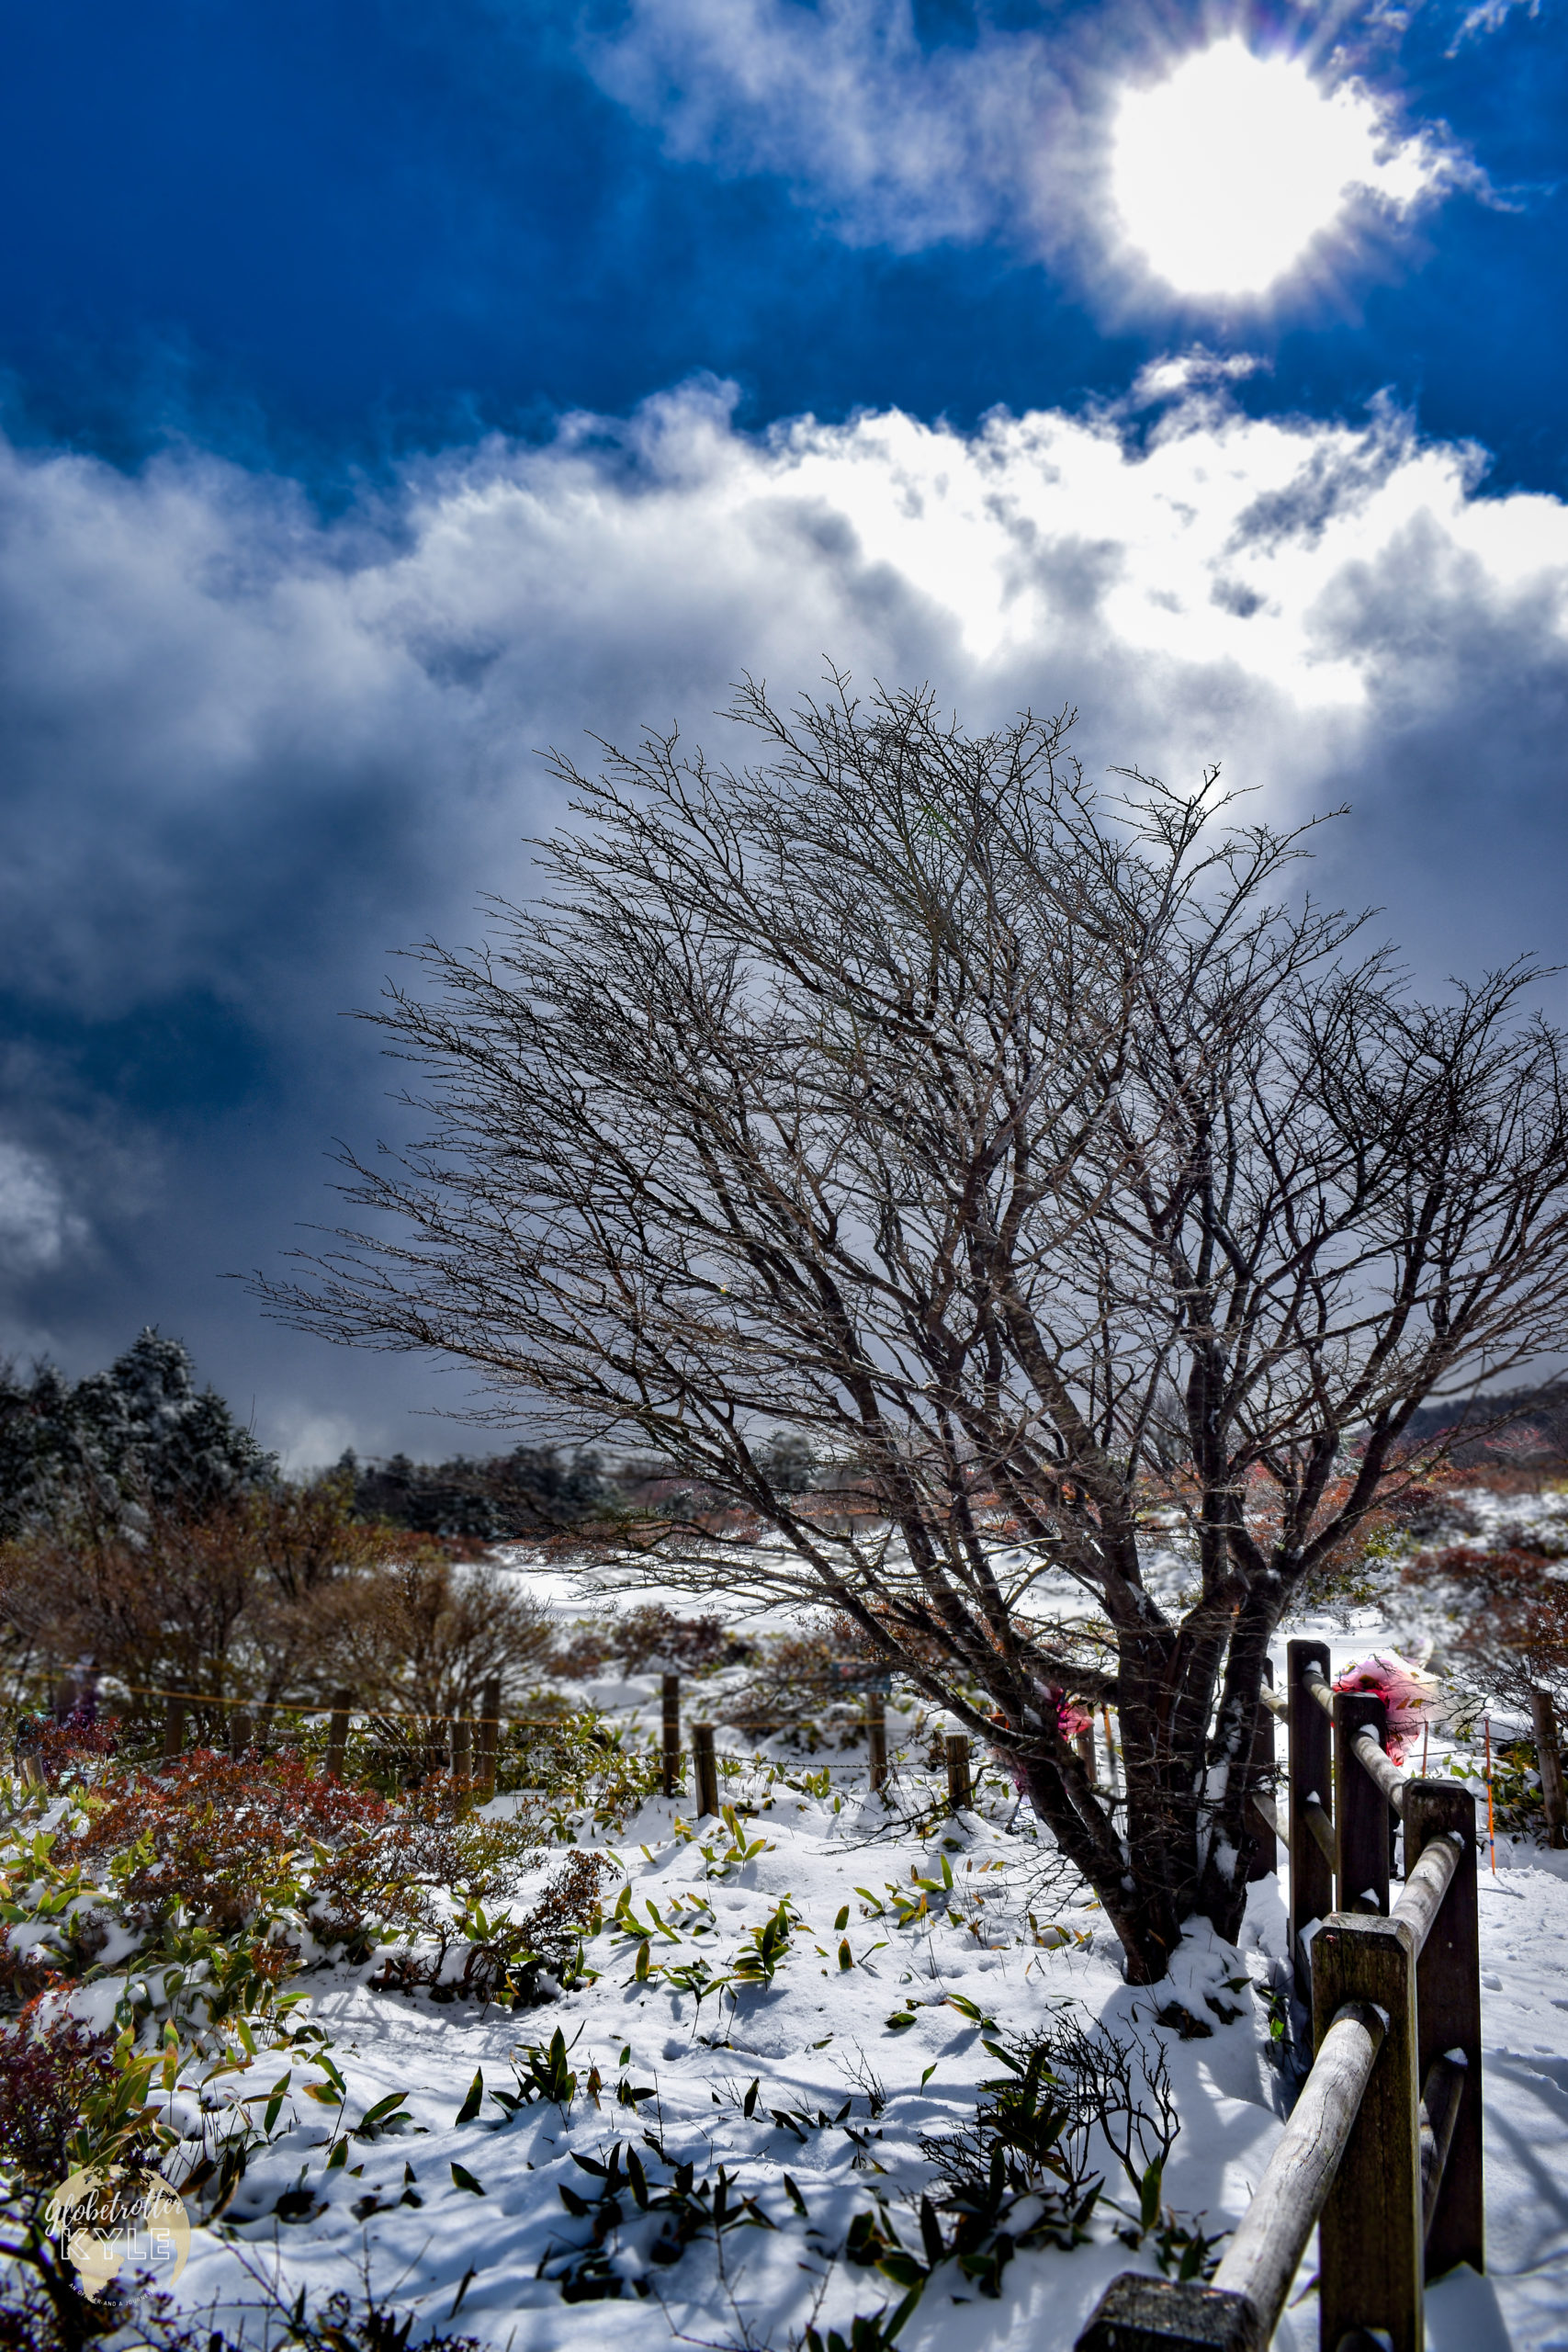 a baron tree stands solo near a wooden fence with snow covering the ground at the Jindalaebat shelter on Mt Hallasan in Jeju South Korea